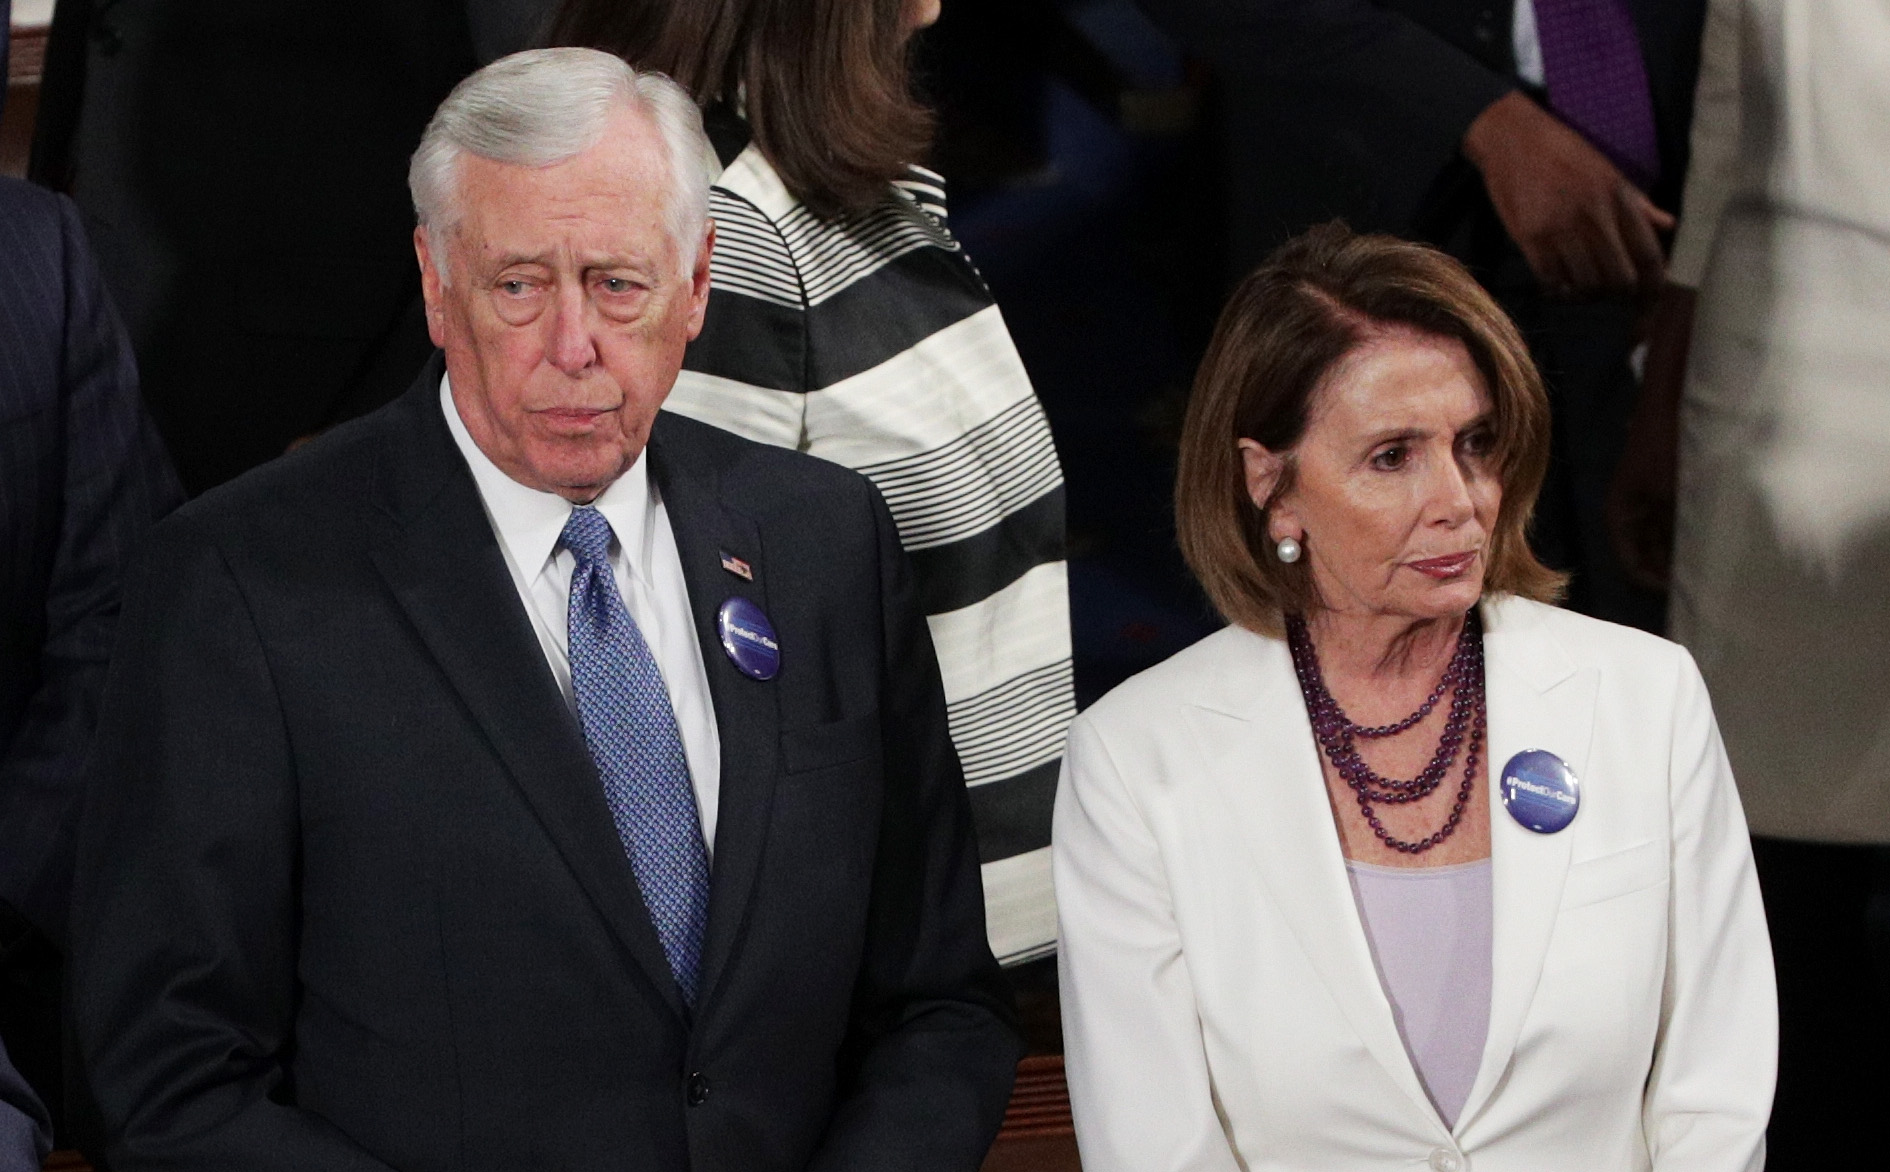 PHOTO: Rep Steny Hoyer (D-MD) and  House Minority Leader Nancy Pelosi (D-CA) arrive to a joint session of the U.S. Congress with President Donald Trump, Feb. 28, 2017.